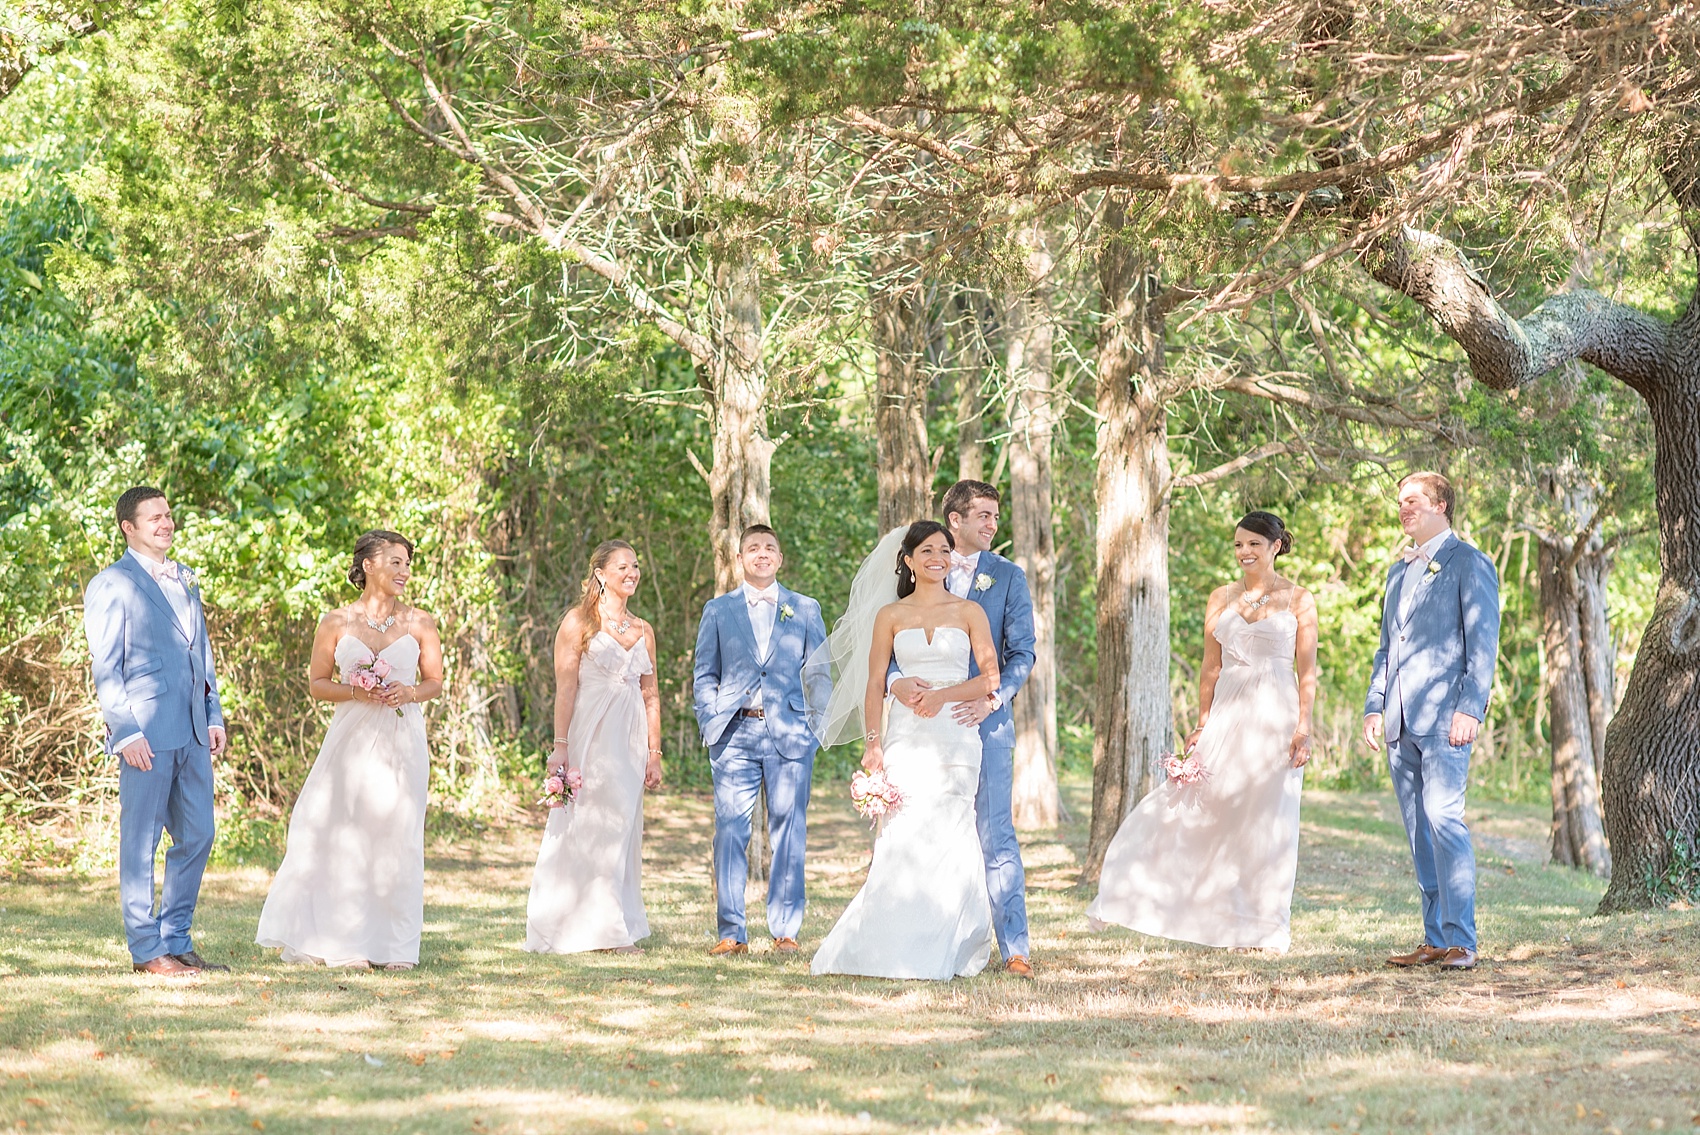 Connecticut beach wedding photos by Mikkel Paige Photography. Groomsmen in blue suits and pink bow ties and bridesmaids in blush chiffon gowns.